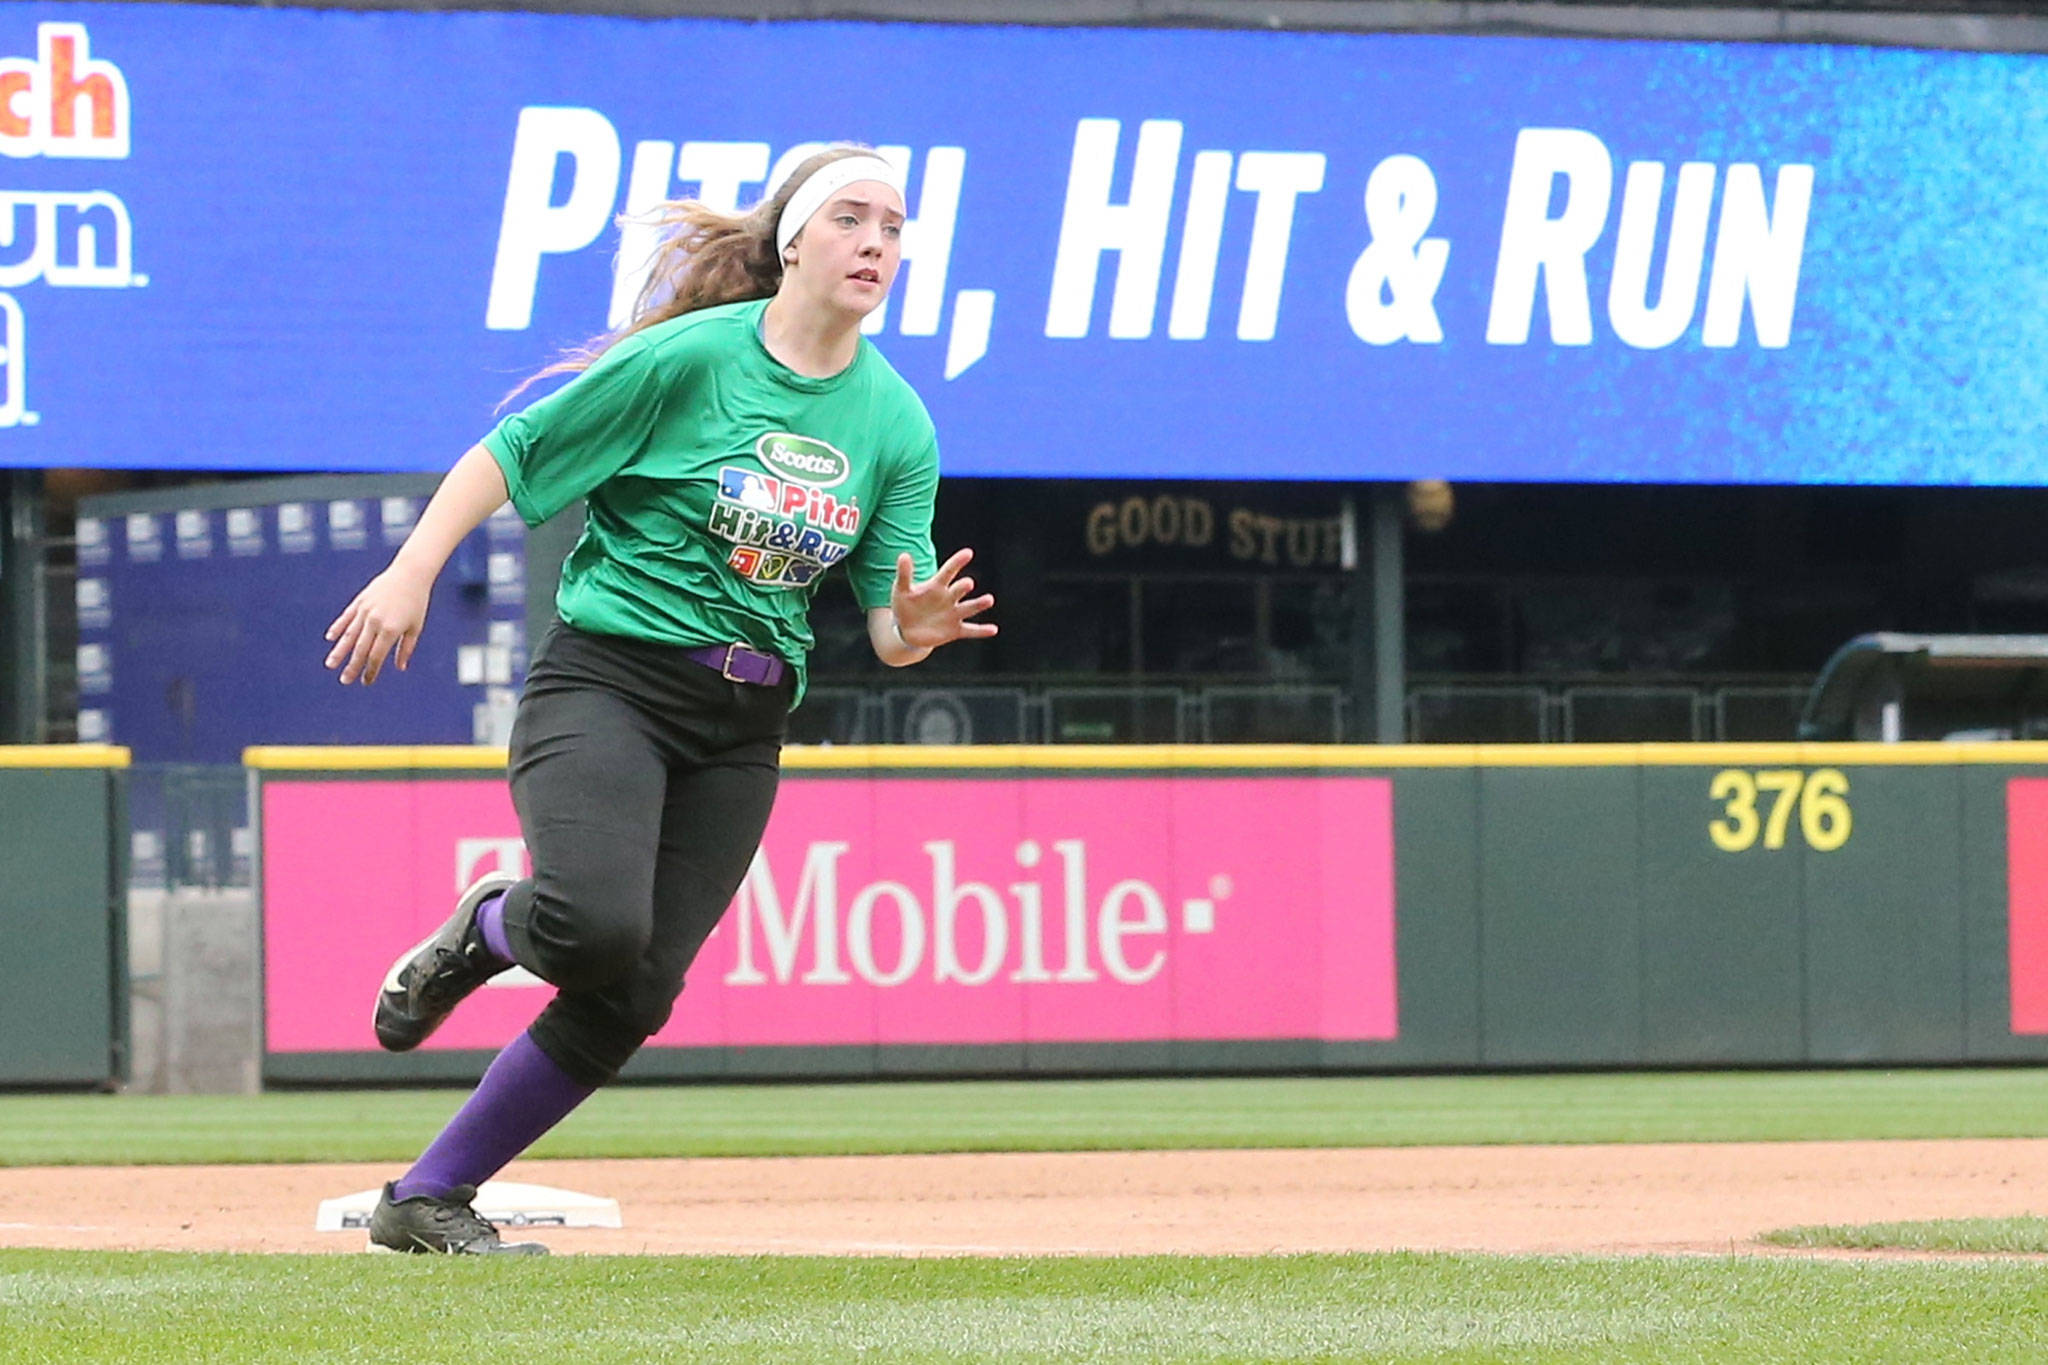 Katie Bishop races around third base during the Pitch, Hit and Run contest Sunday. (Photo by John Fisken)